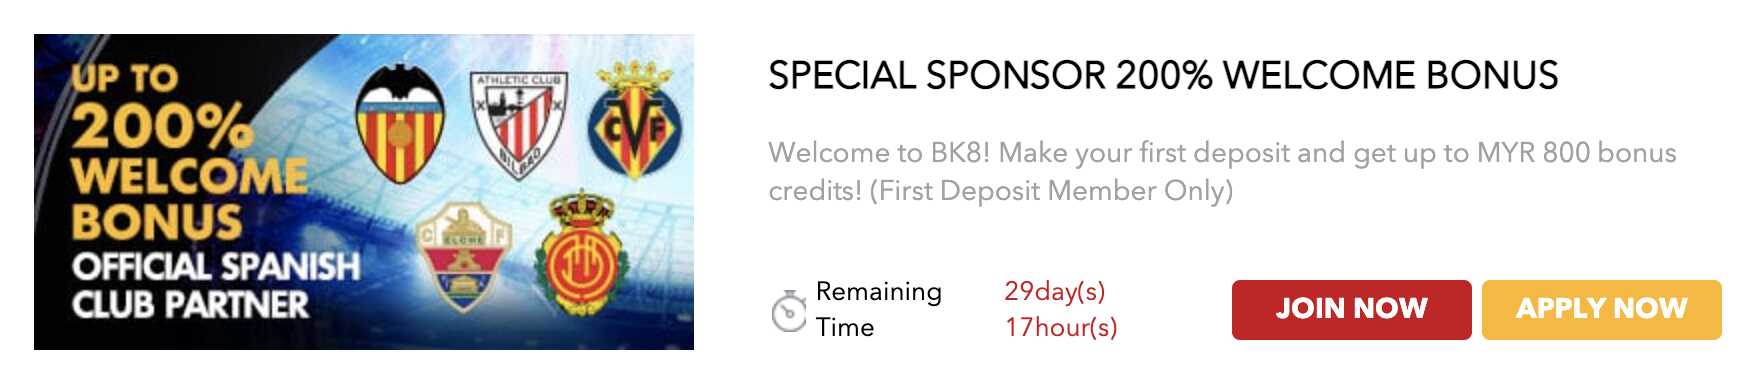 bk8 malaysia - up to 200% welcome bonus offer